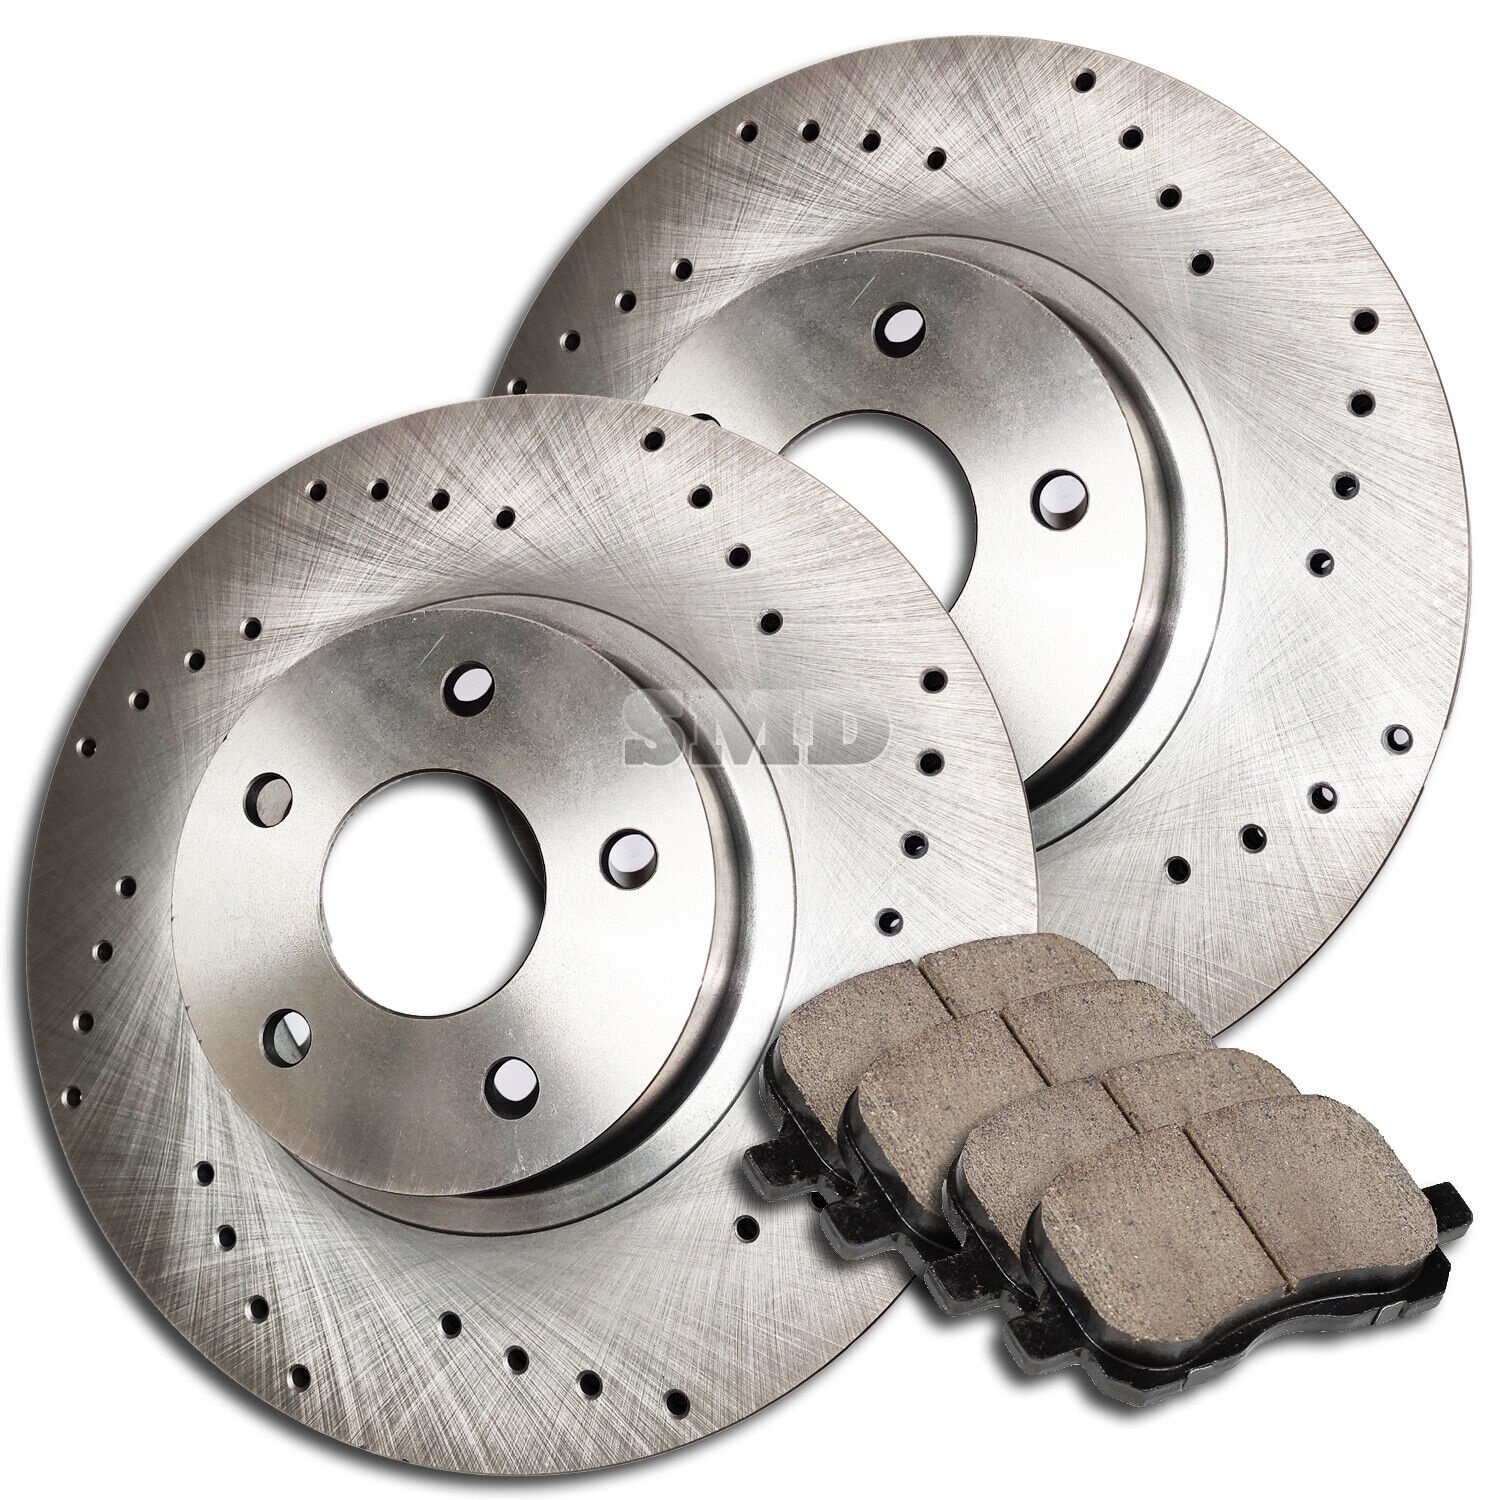 brake disc rotor BMW 535D 535D XDRIVE 14-16 A0839 FIT 2010 2011 Audi A6 Quattro 3.0L SuperCharged 321mm FRONT Rotors Pads